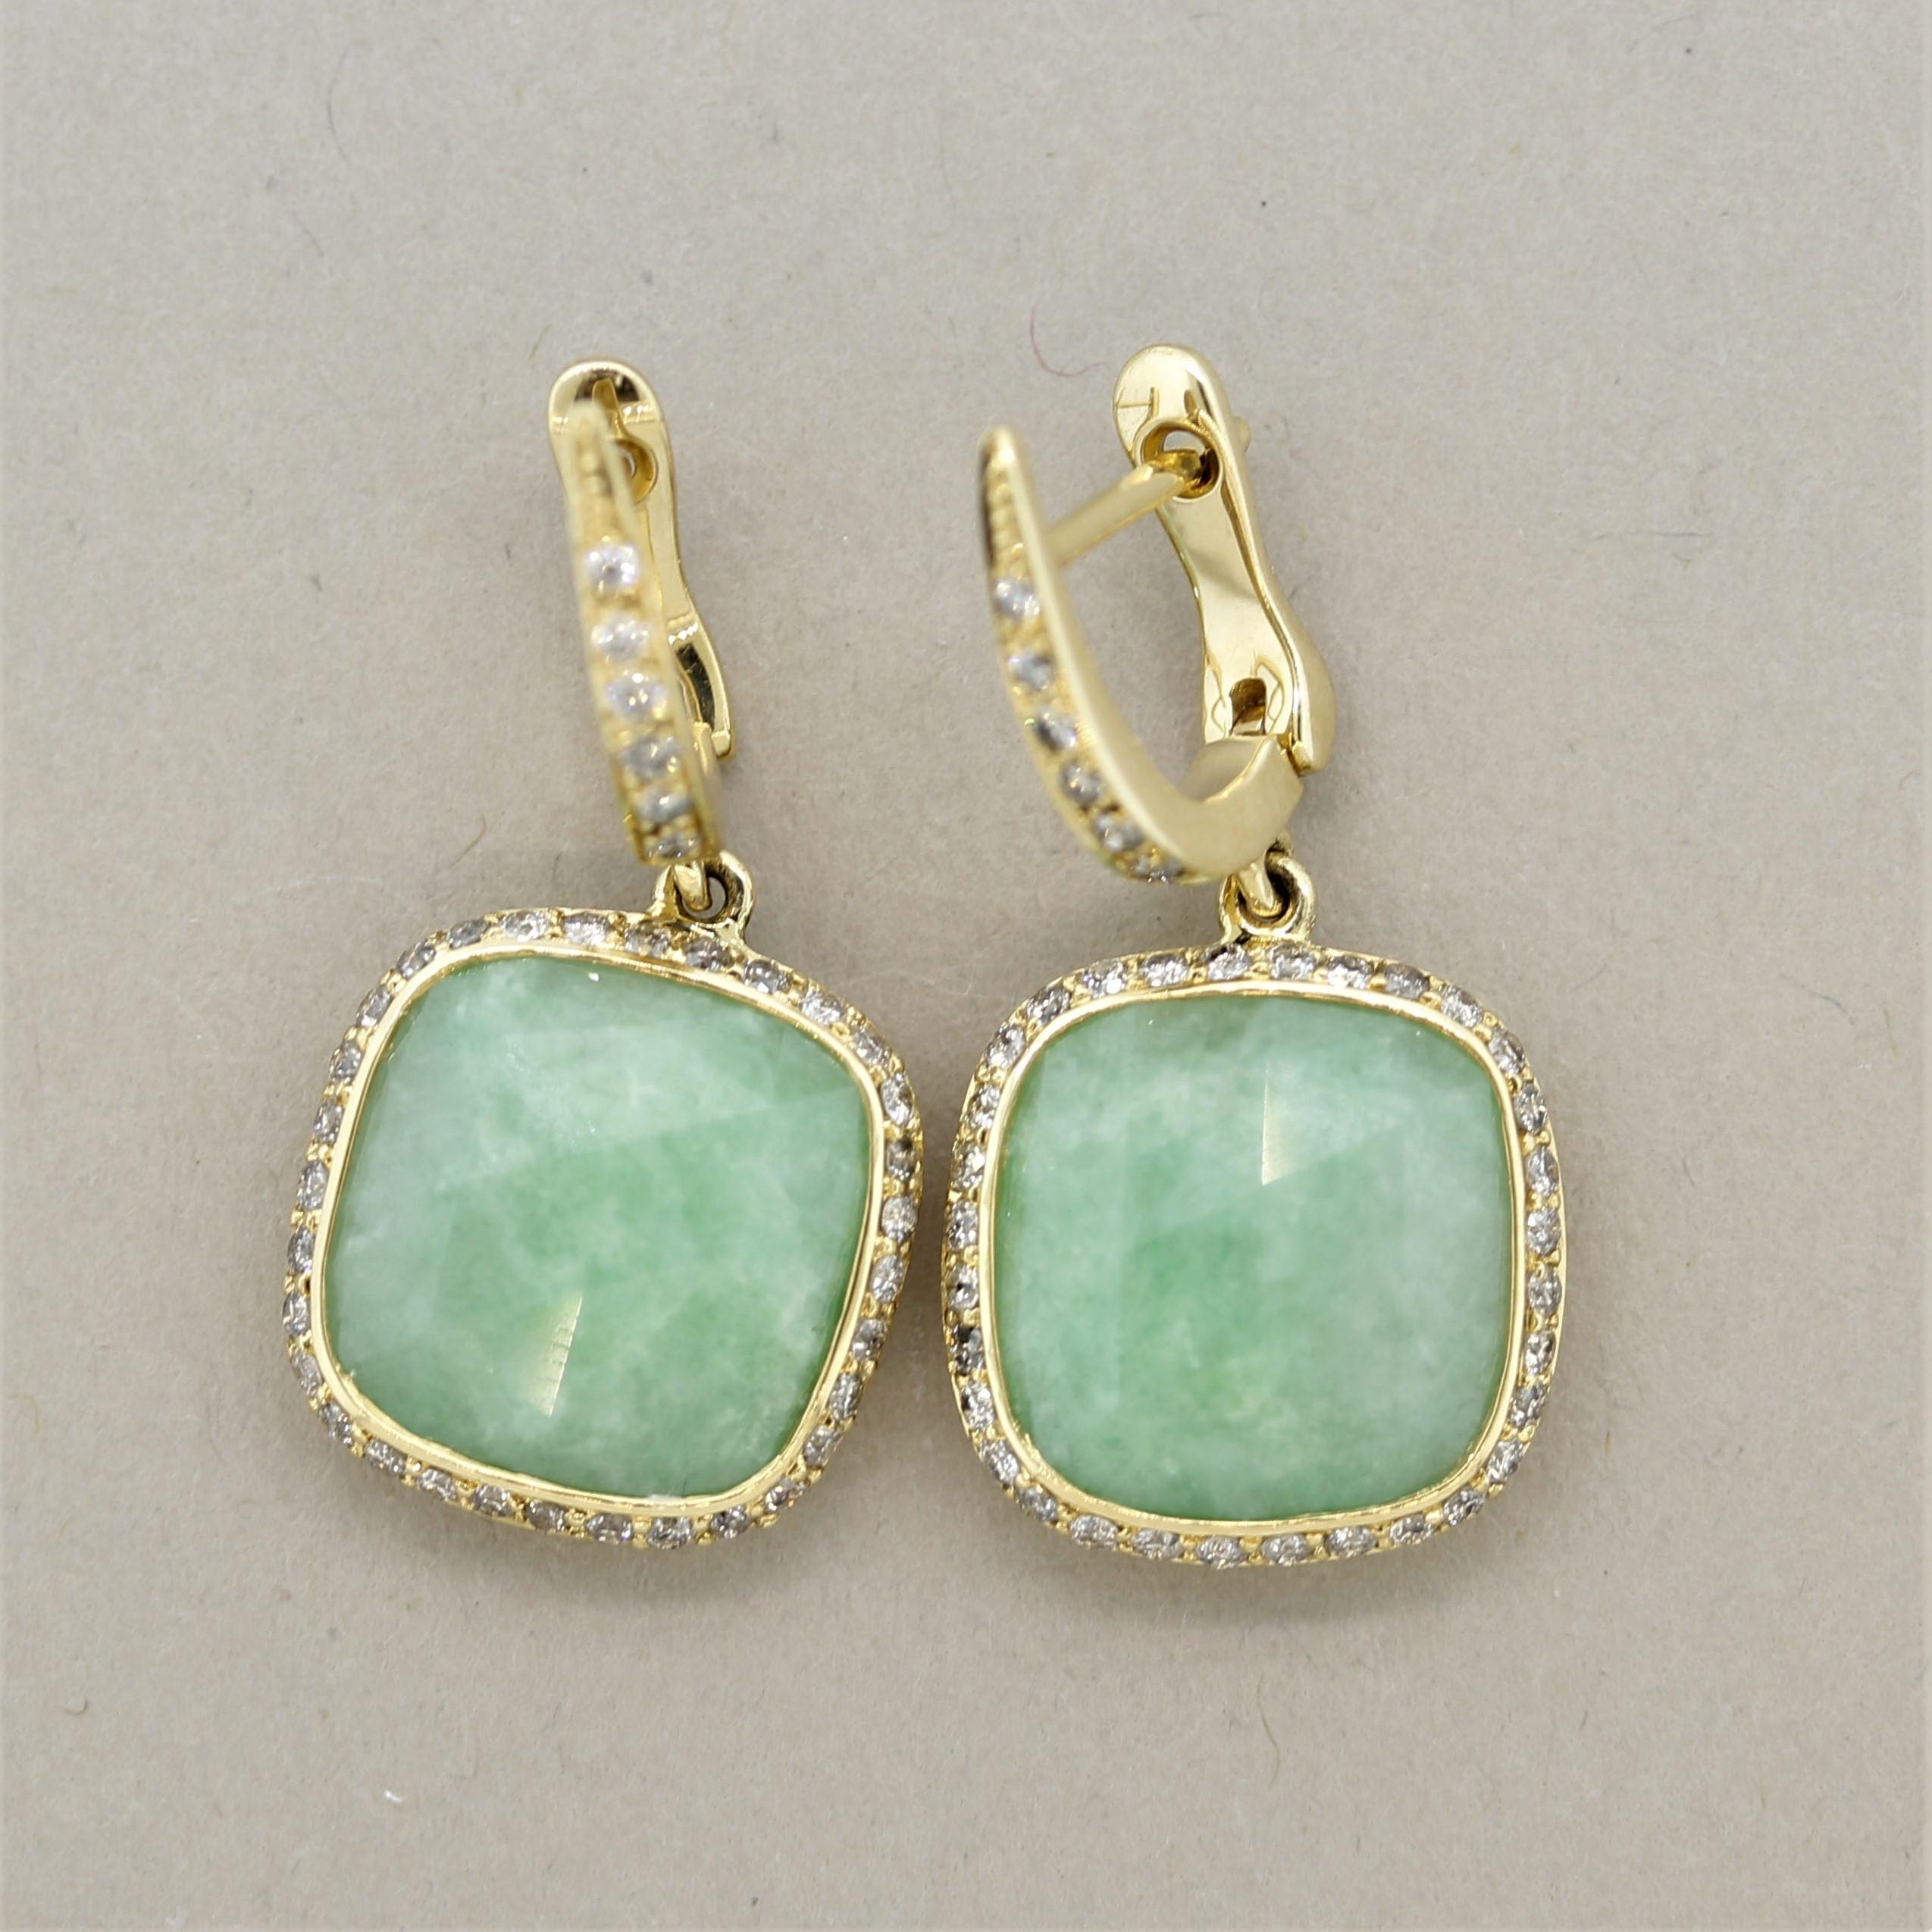 A lovely pair of earrings featuring 9.47 carats of natural jadeite jade. They have a pleasing mottled green color and a faceted rose-cut top for an added unique look. They are surrounded by 0.71 carats of round brilliant-cut diamonds which add